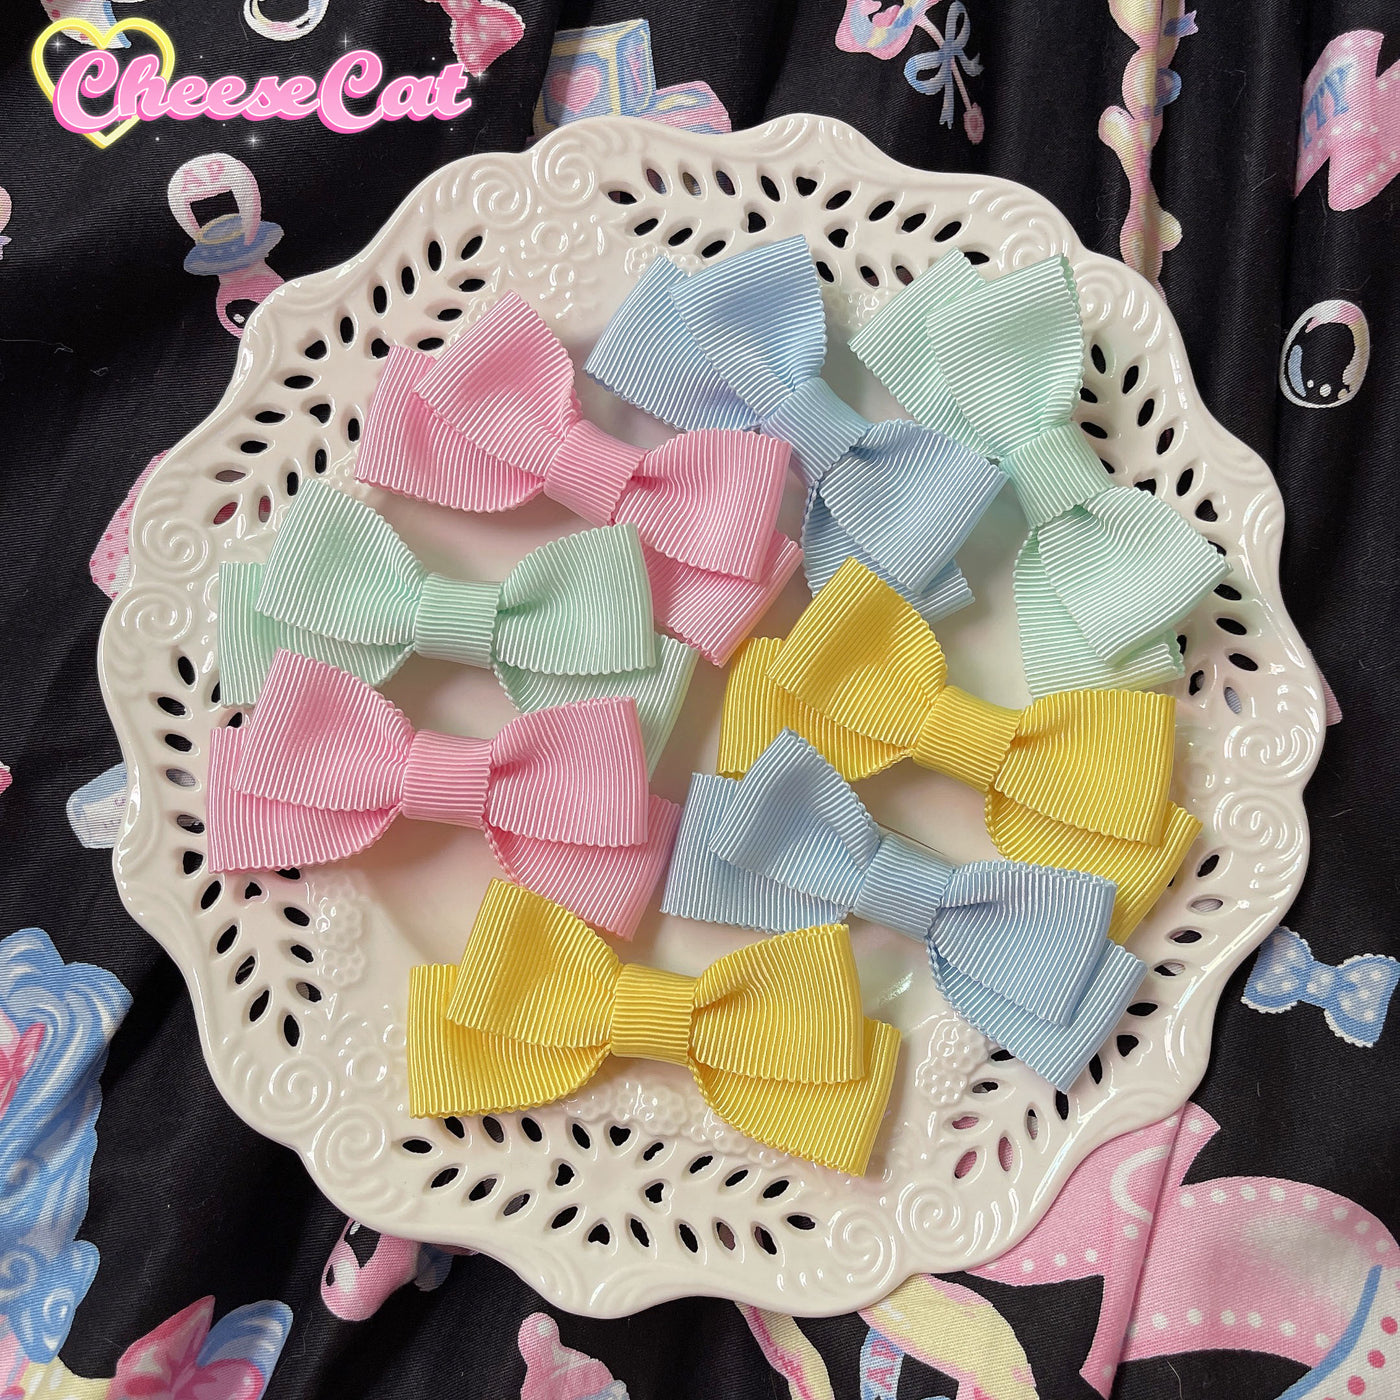 (Buyforme)Cheese Cat~Fluffy Lop-Eared Bunny Sweet Lolita Hairband pink brooch (1 pair)  